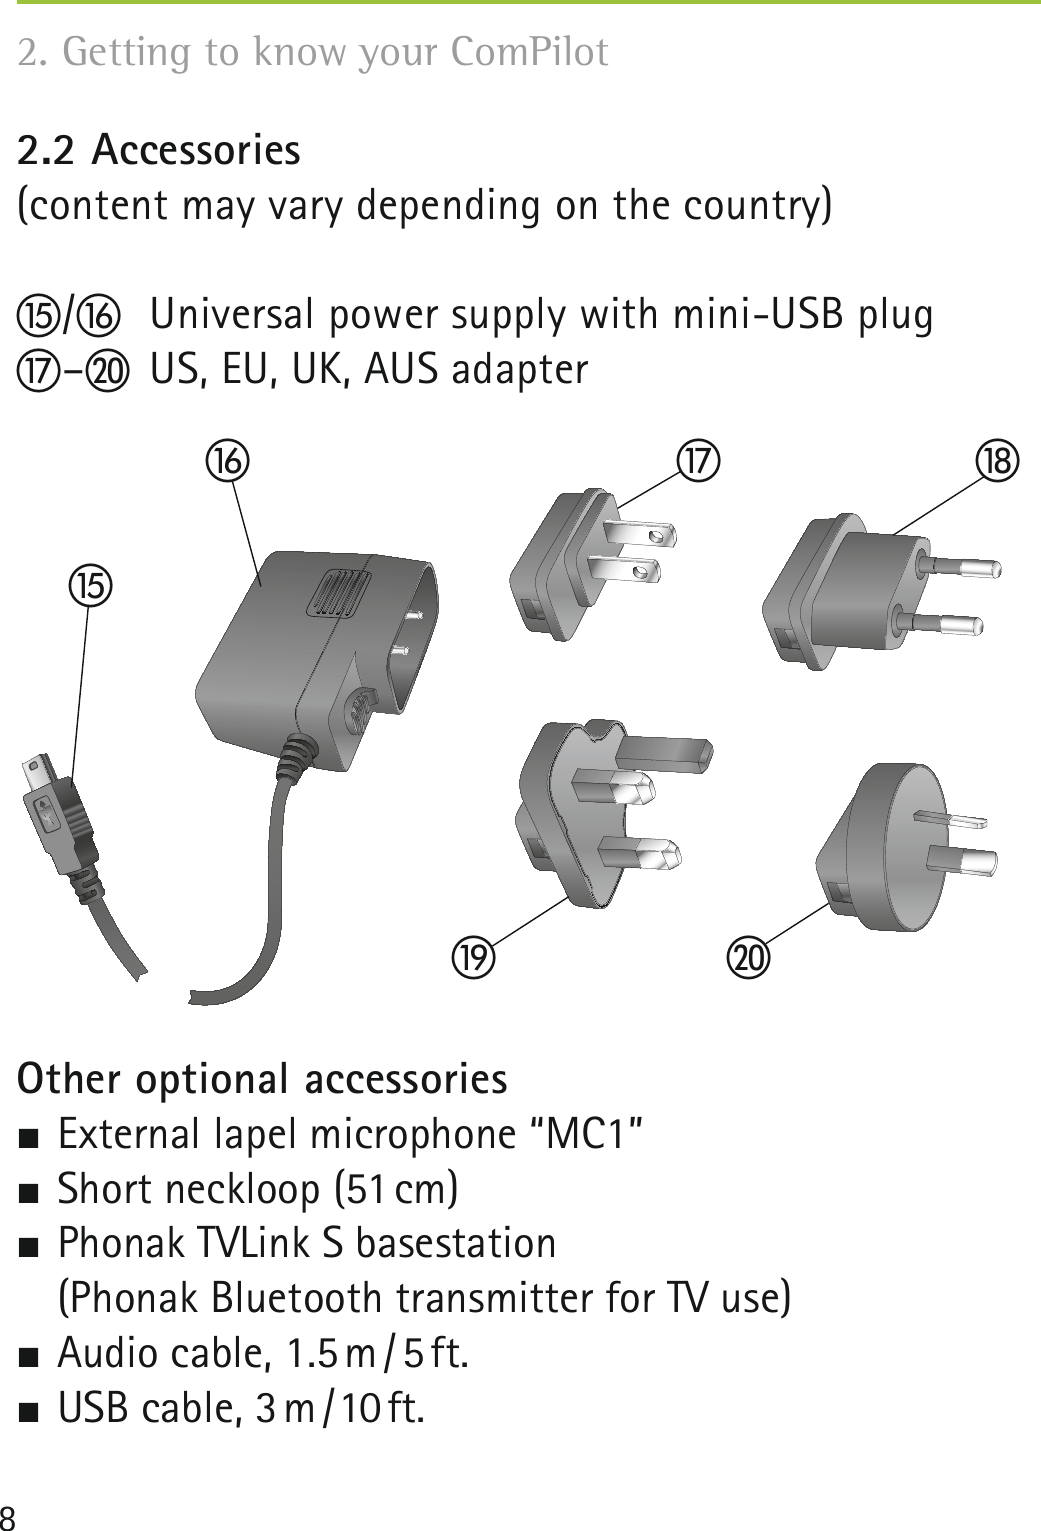 82.2 Accessories (content may vary depending on the country)o/p  Universal power supply with mini-USB plugq–t  US, EU, UK, AUS adapterOther optional accessories External lapel microphone “MC1” Short neckloop (51 cm) Phonak TVLink S basestation  (Phonak Bluetooth transmitter for TV use) Audio  cable,  1.5 m / 5 ft.  USB  cable,  3 m / 10 ft. 2. Getting to know your ComPilot opqrts